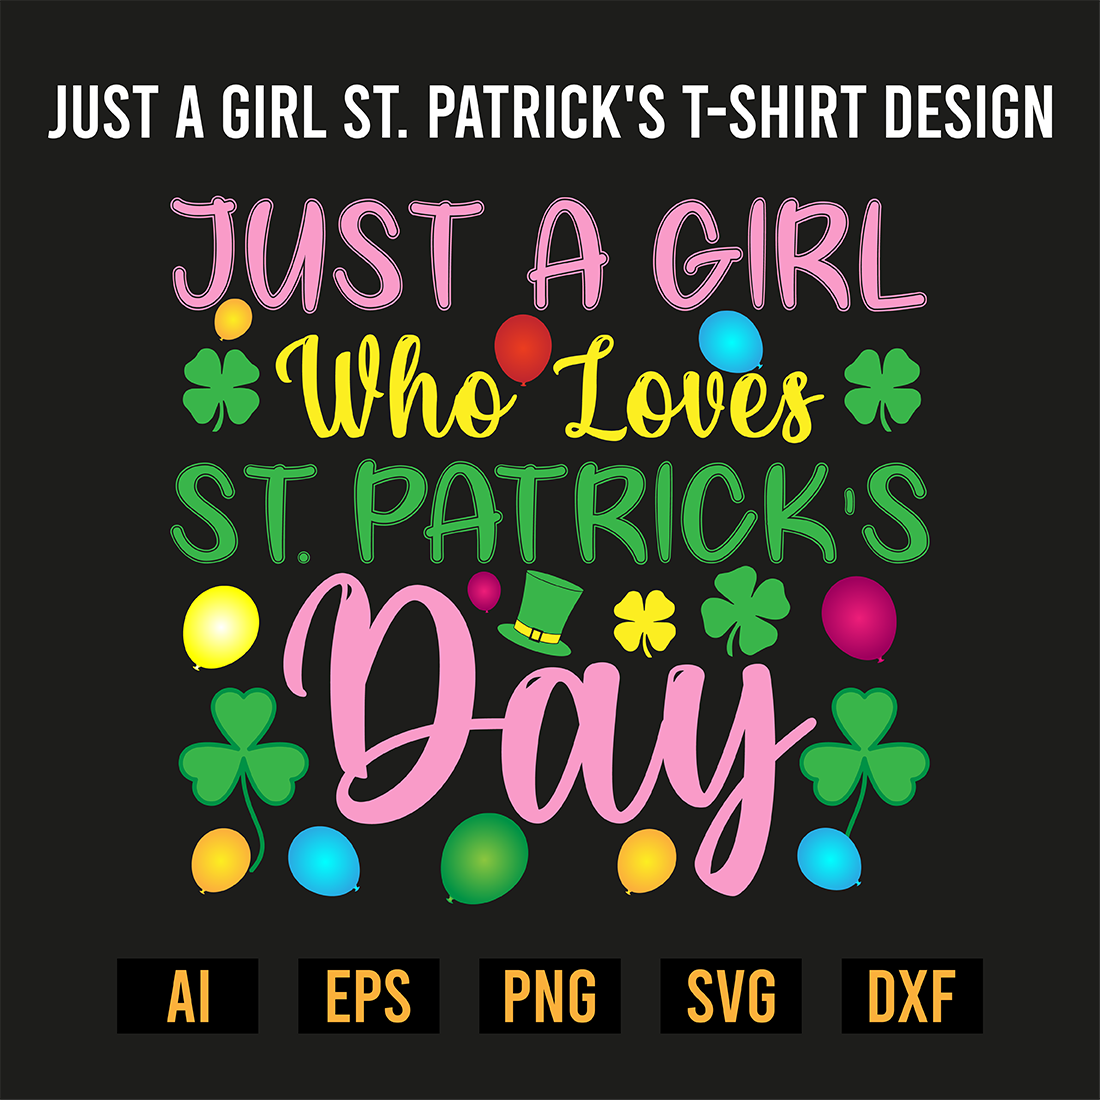 Just a Girl St Patrick's T-Shirt Design preview image.